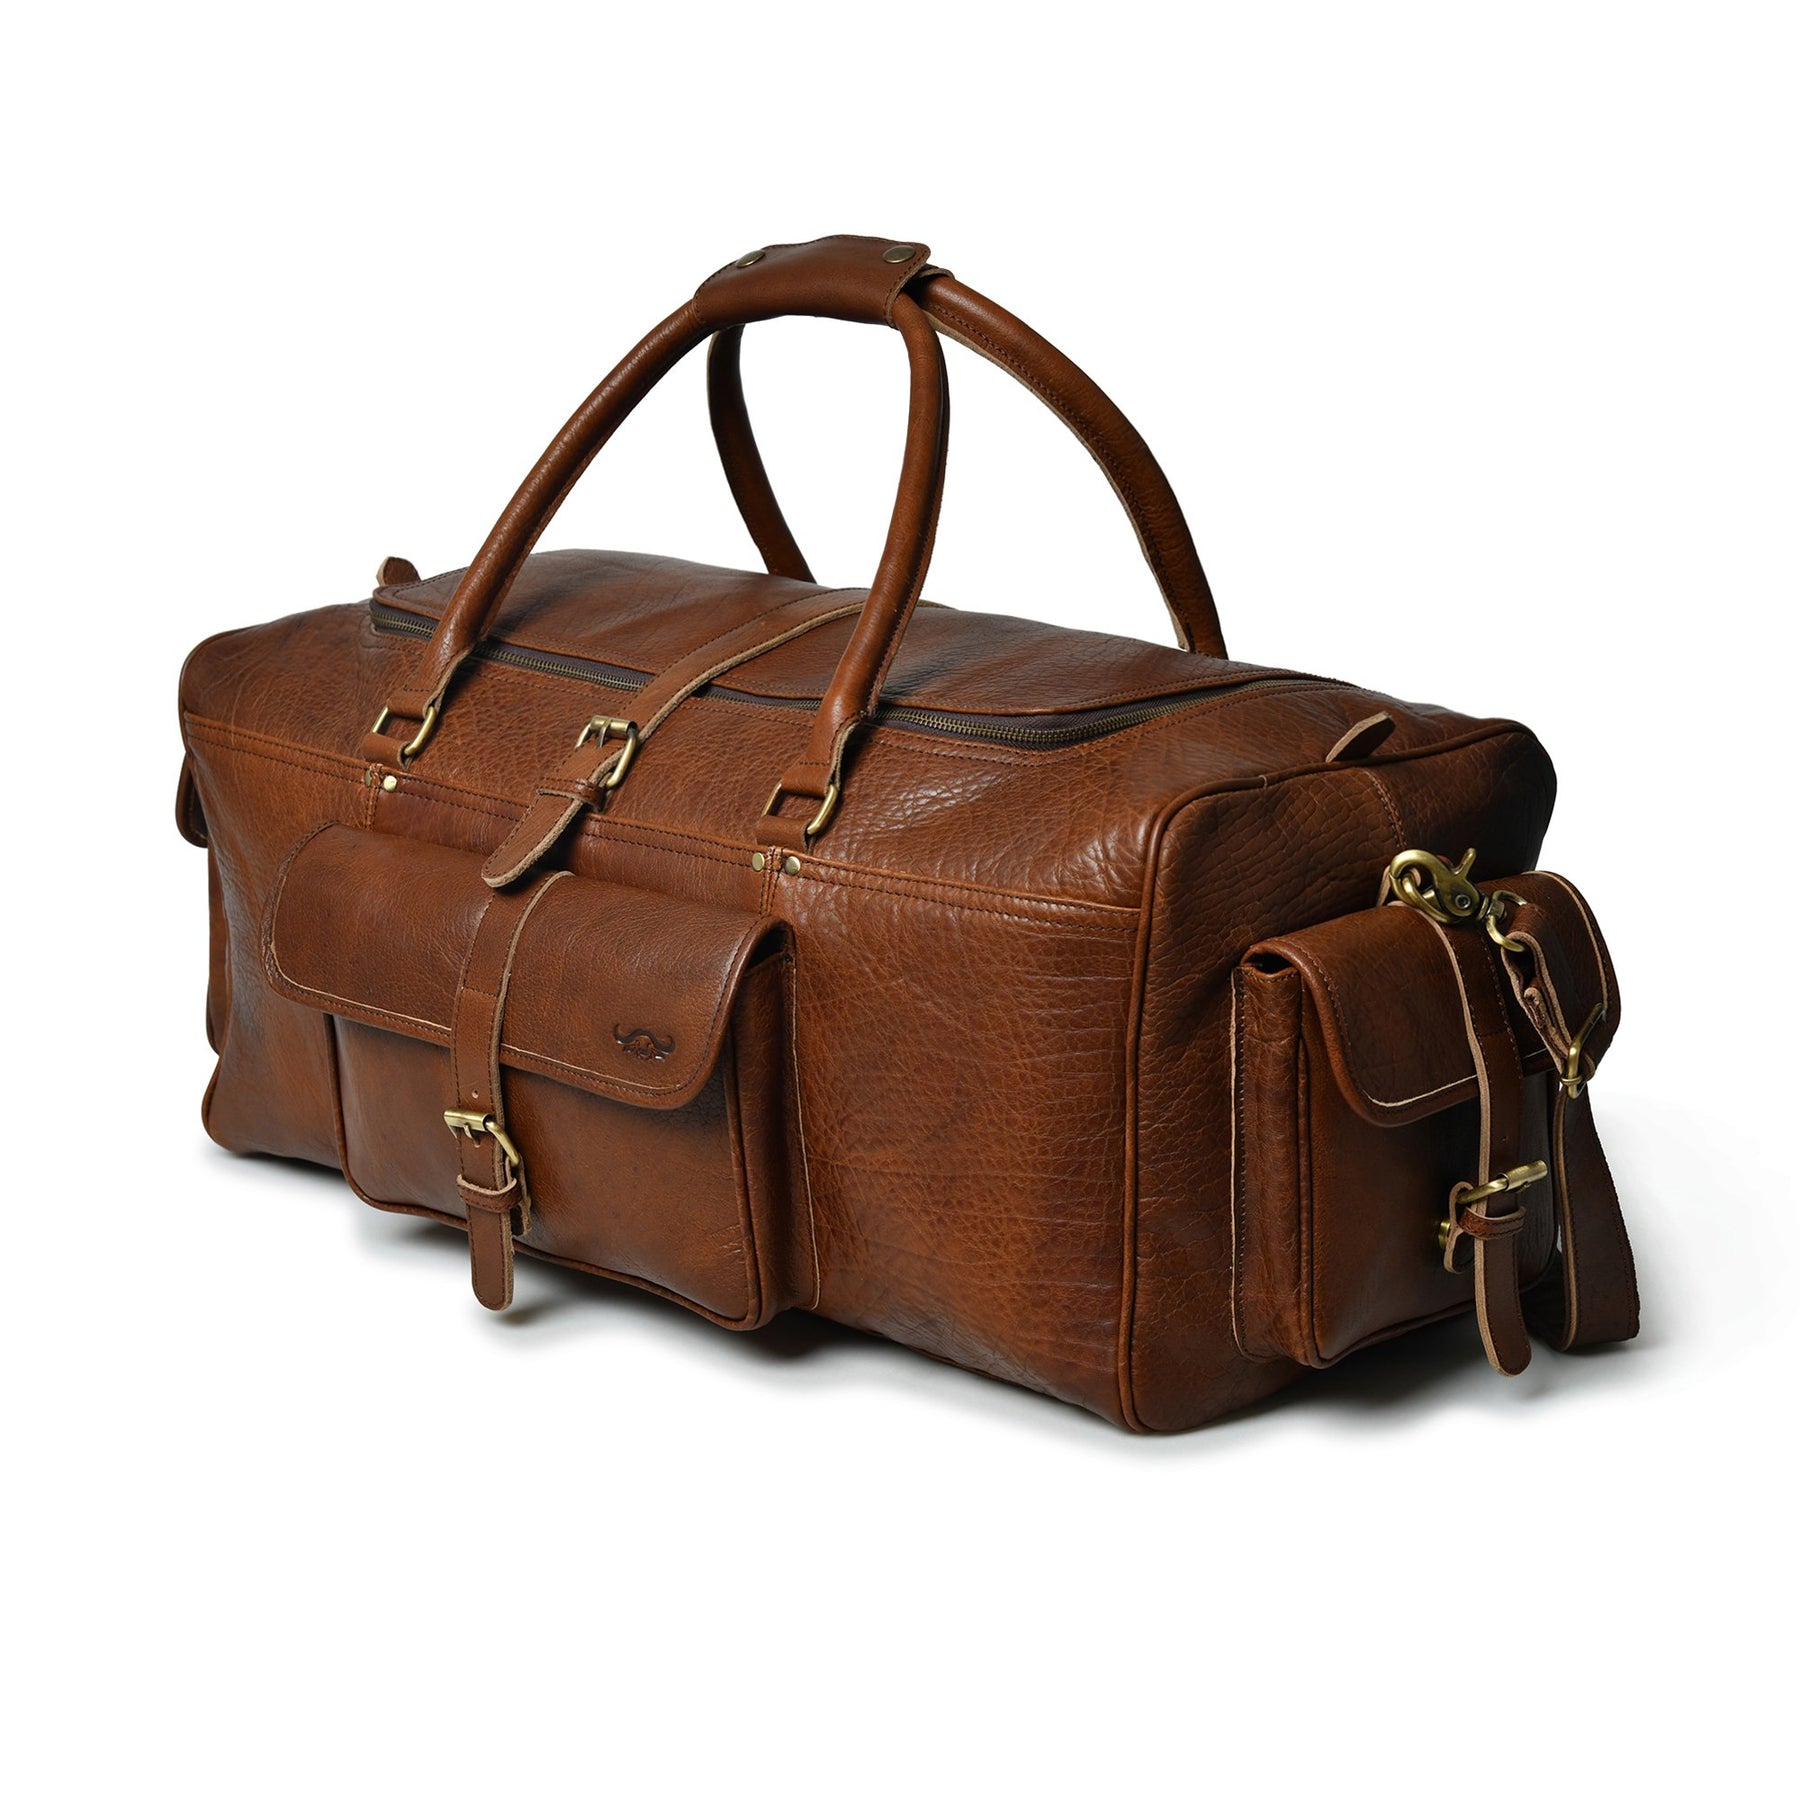 Buy Leather Duffle Bags Online in USA | Leather Duffle Bags USA | Sams ...